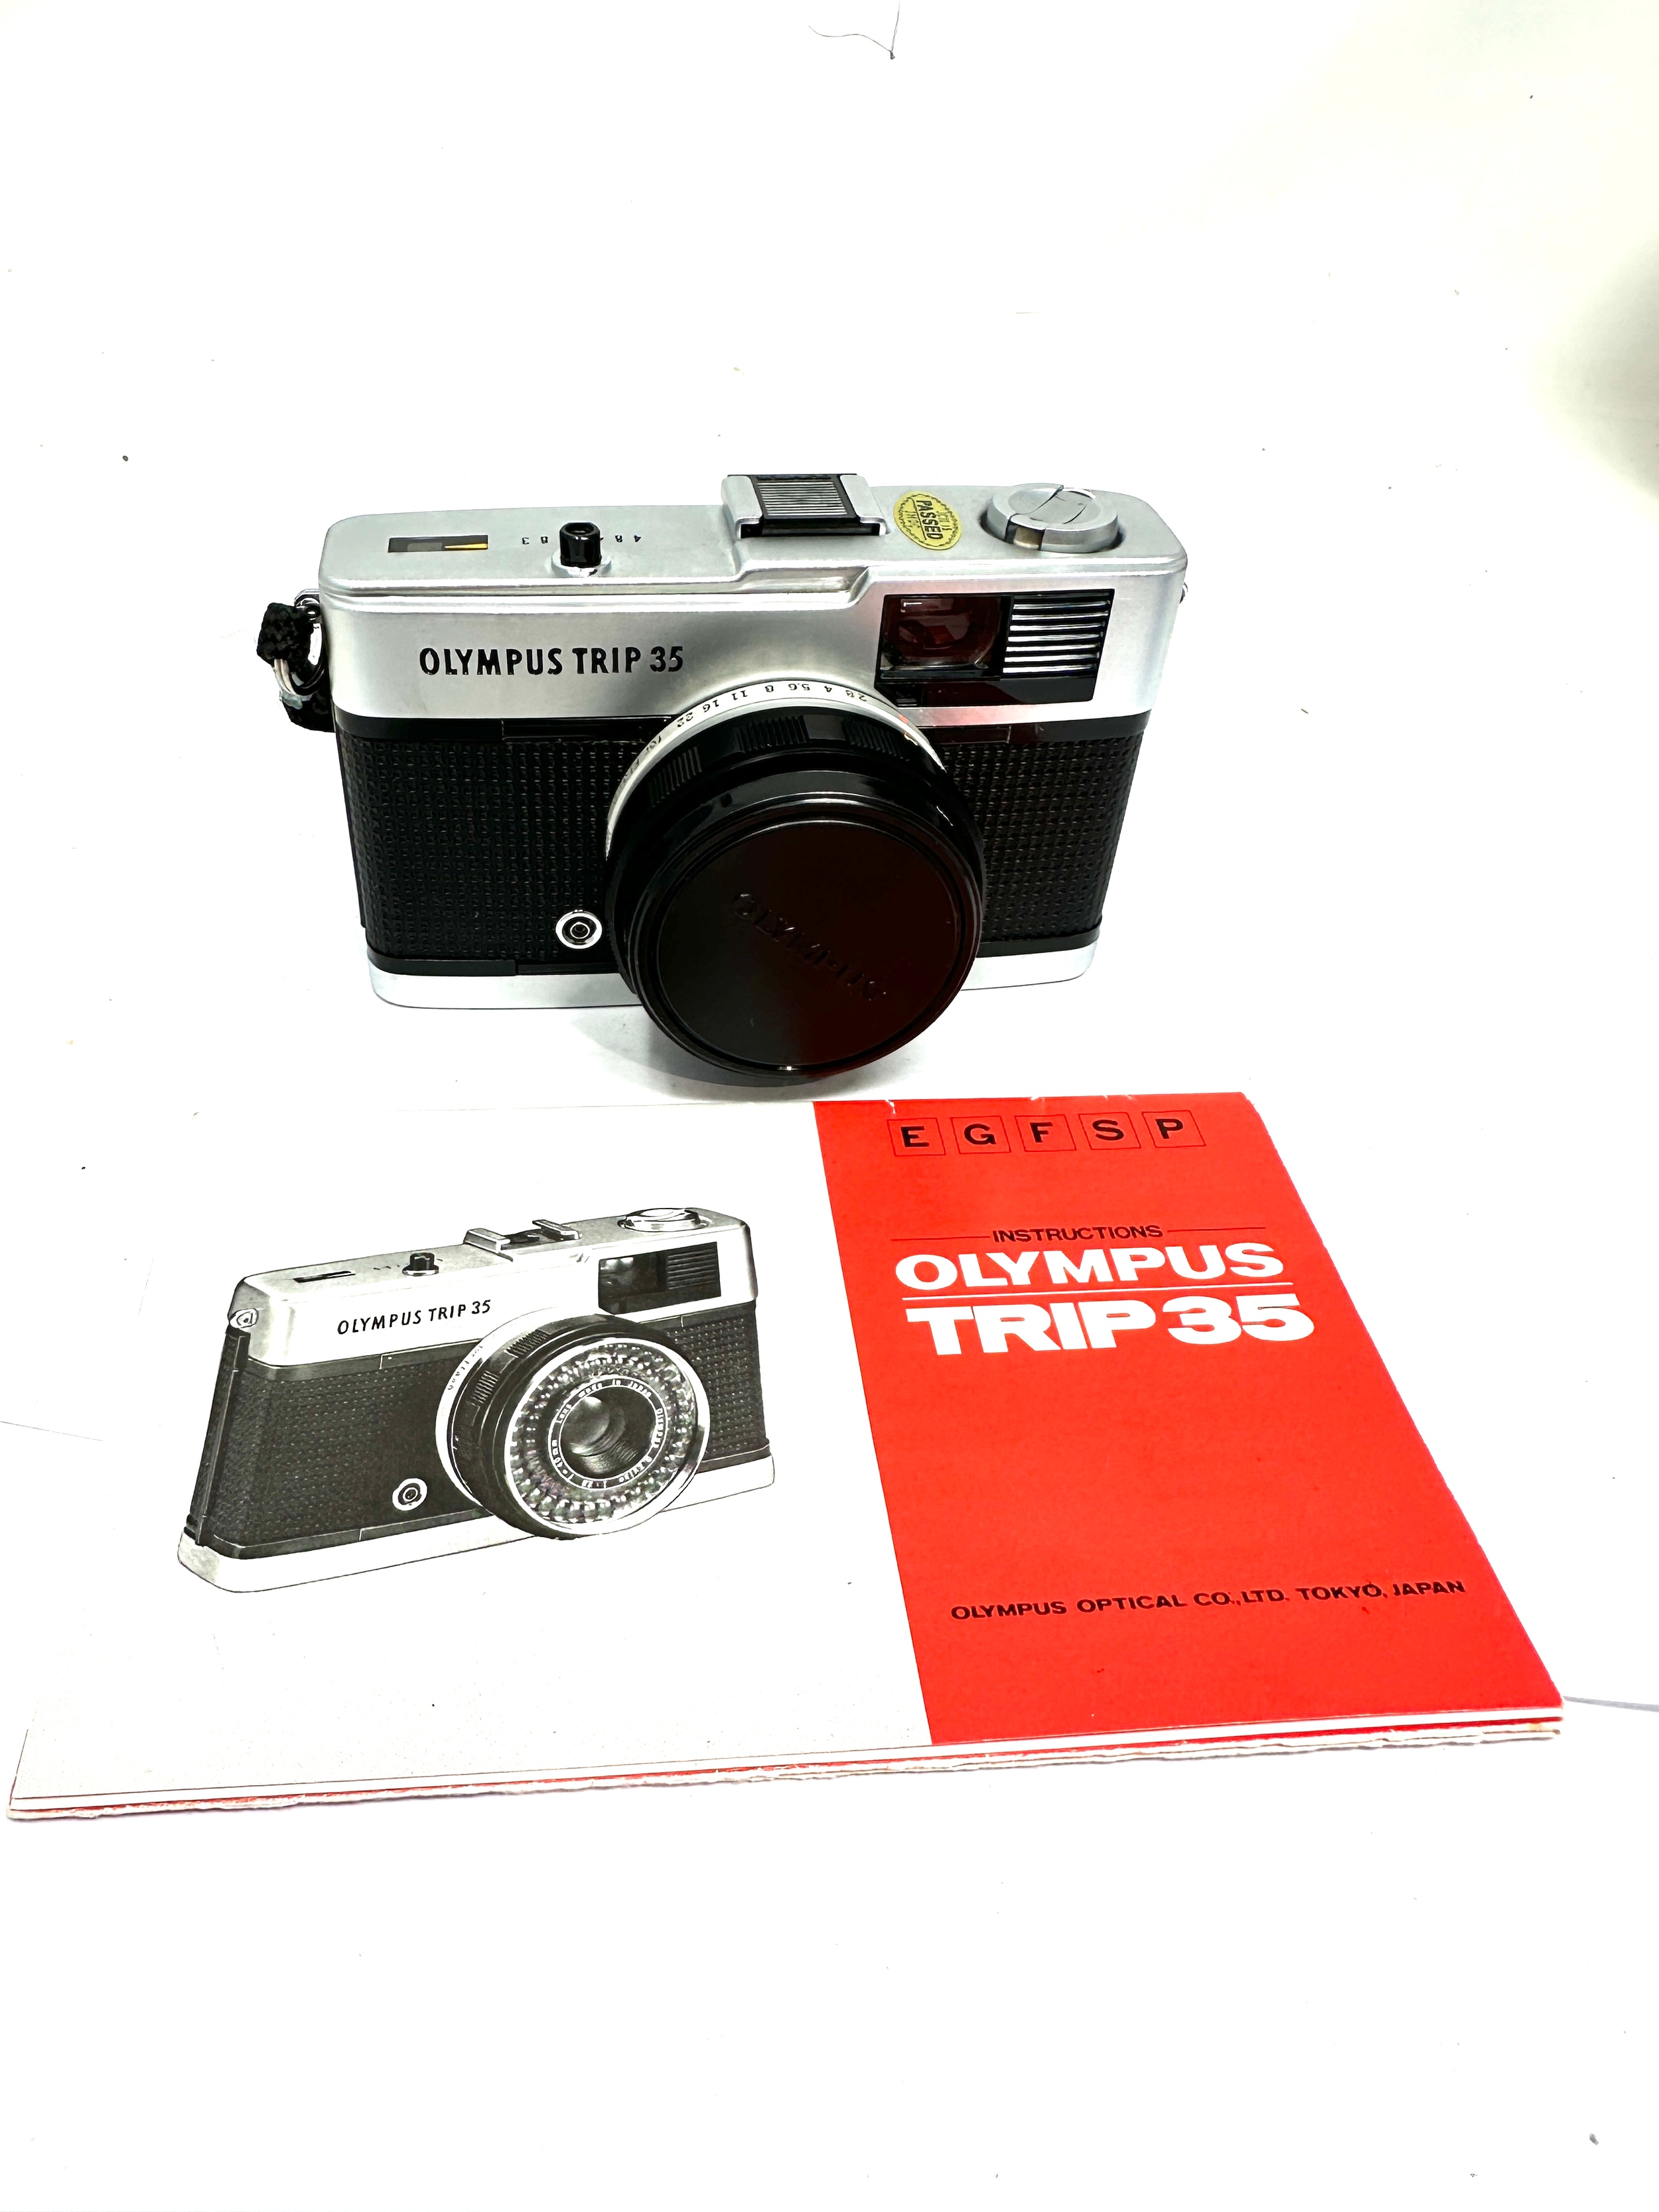 olympus trip 35 camera complete in box with booklets in good condition - Image 3 of 6